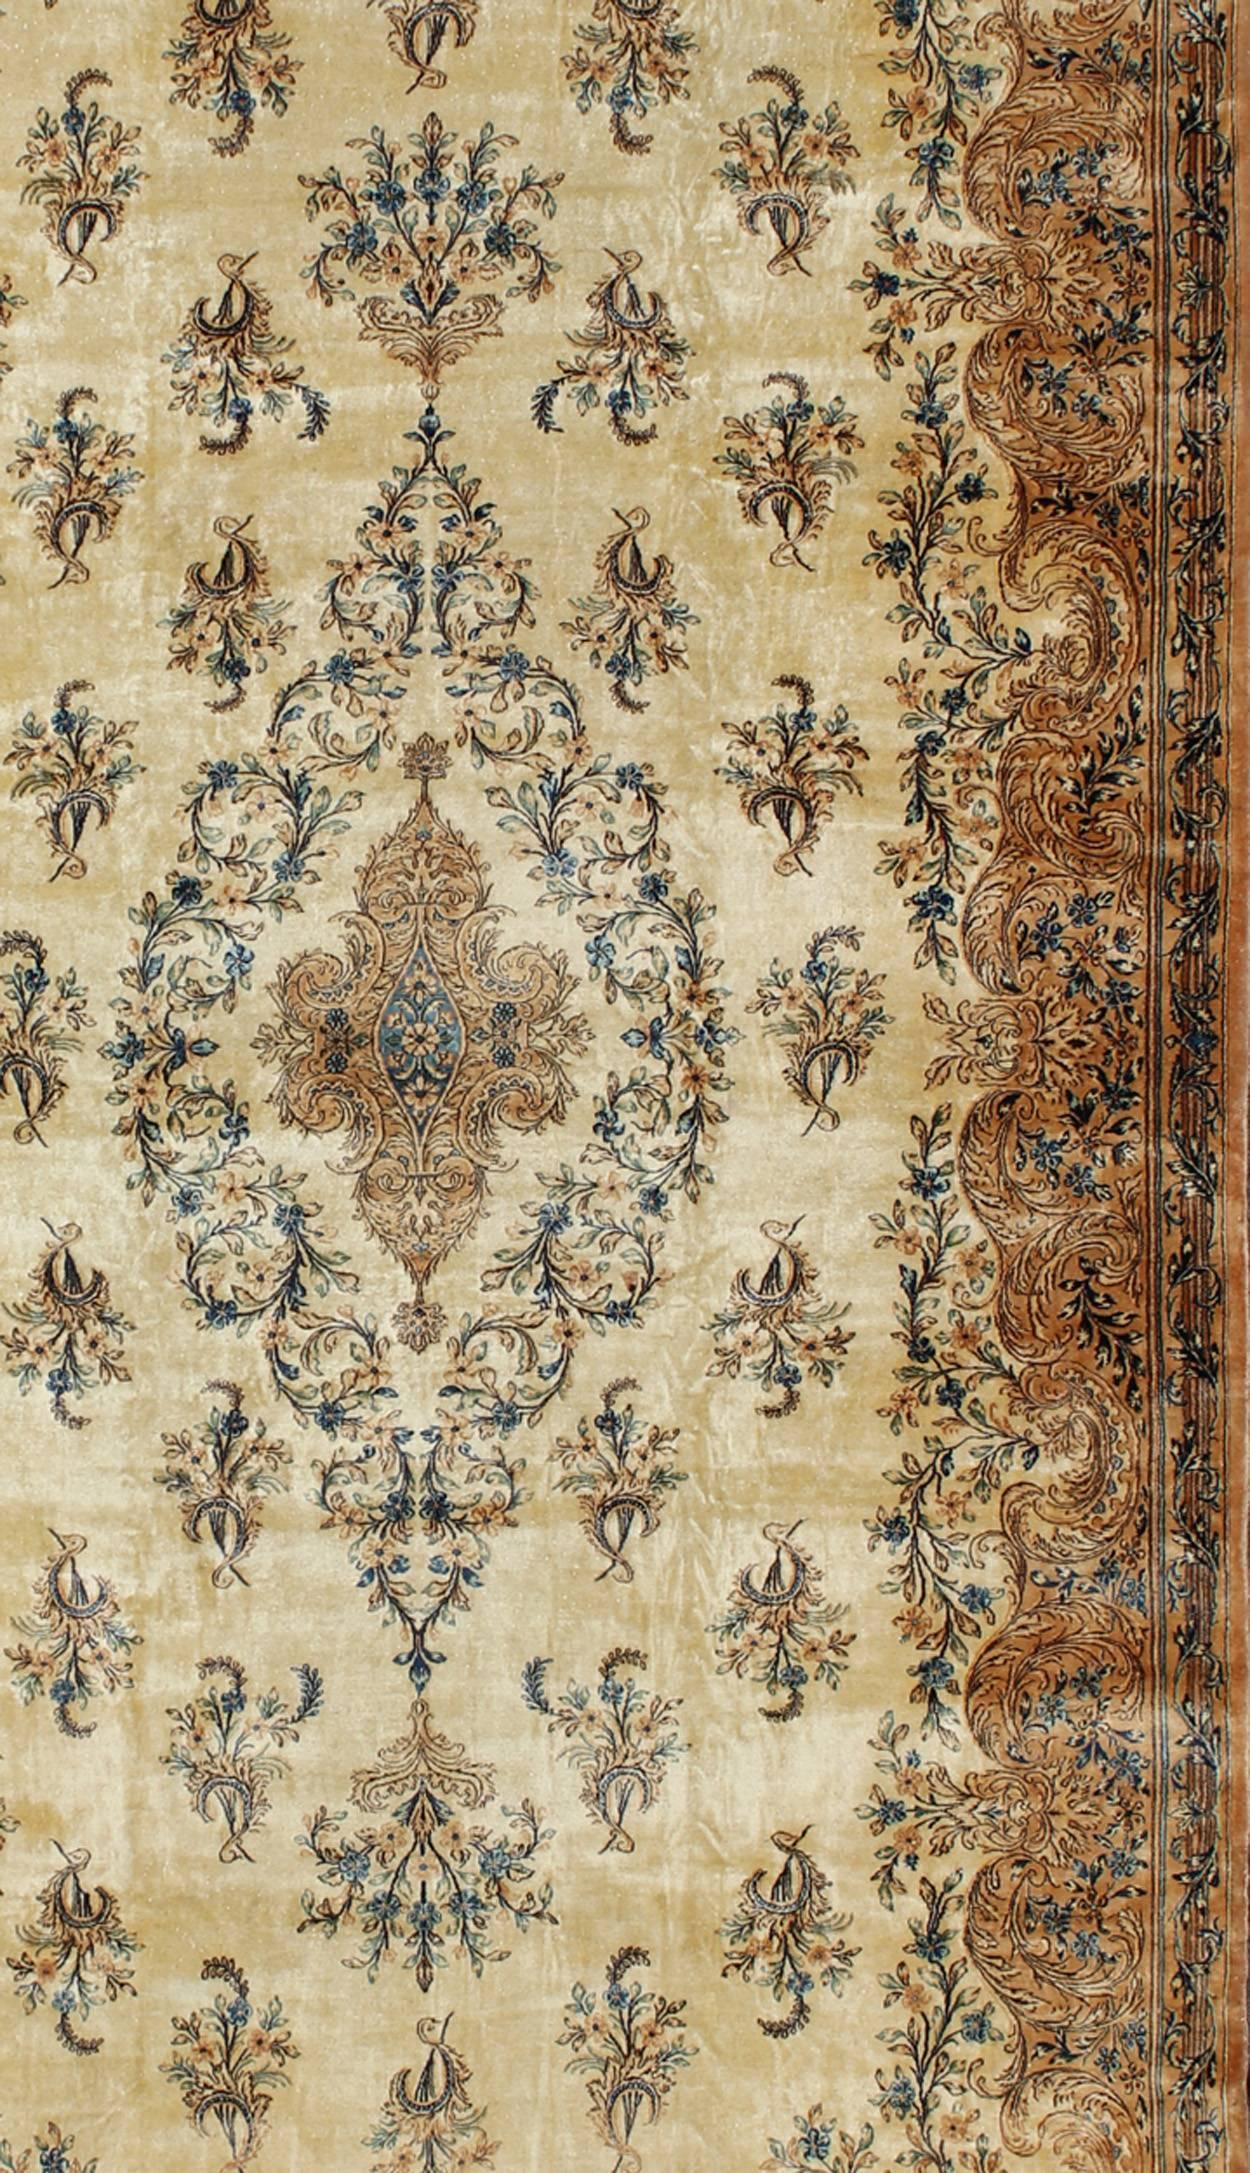 Persian Large Antique Lavar Kerman Rug with Blossoming Floral Motifs in Cream and Blue